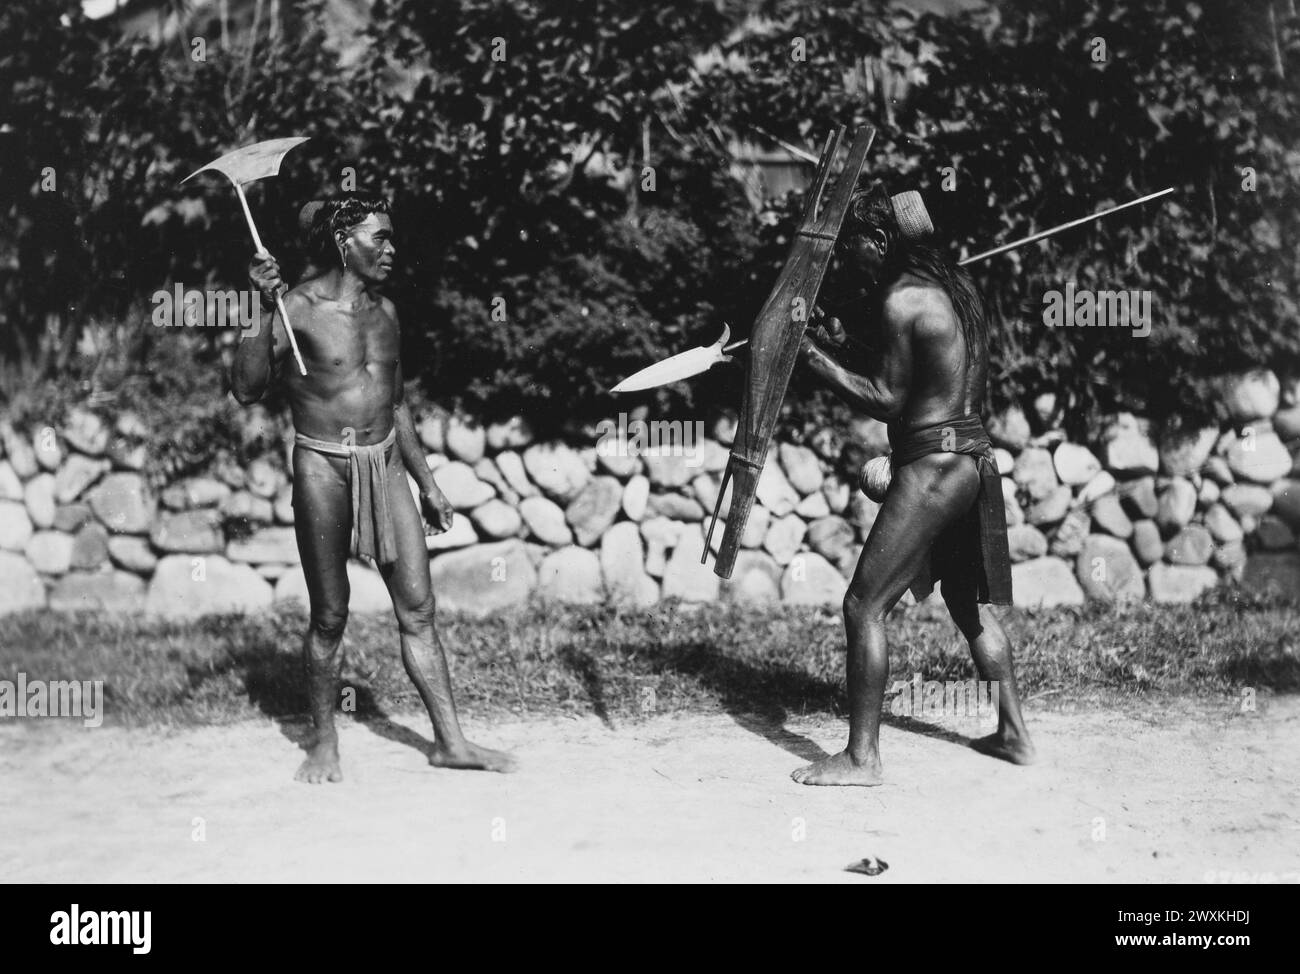 Original caption: Bontoc, Bontoc Province, The Philippines. Sept. 19, 1931. Two natives of Bontoc pose for the cameraman. Not many years ago these people were head-hunters and the Spear and Head-Axe were their chief weapons. Stock Photo